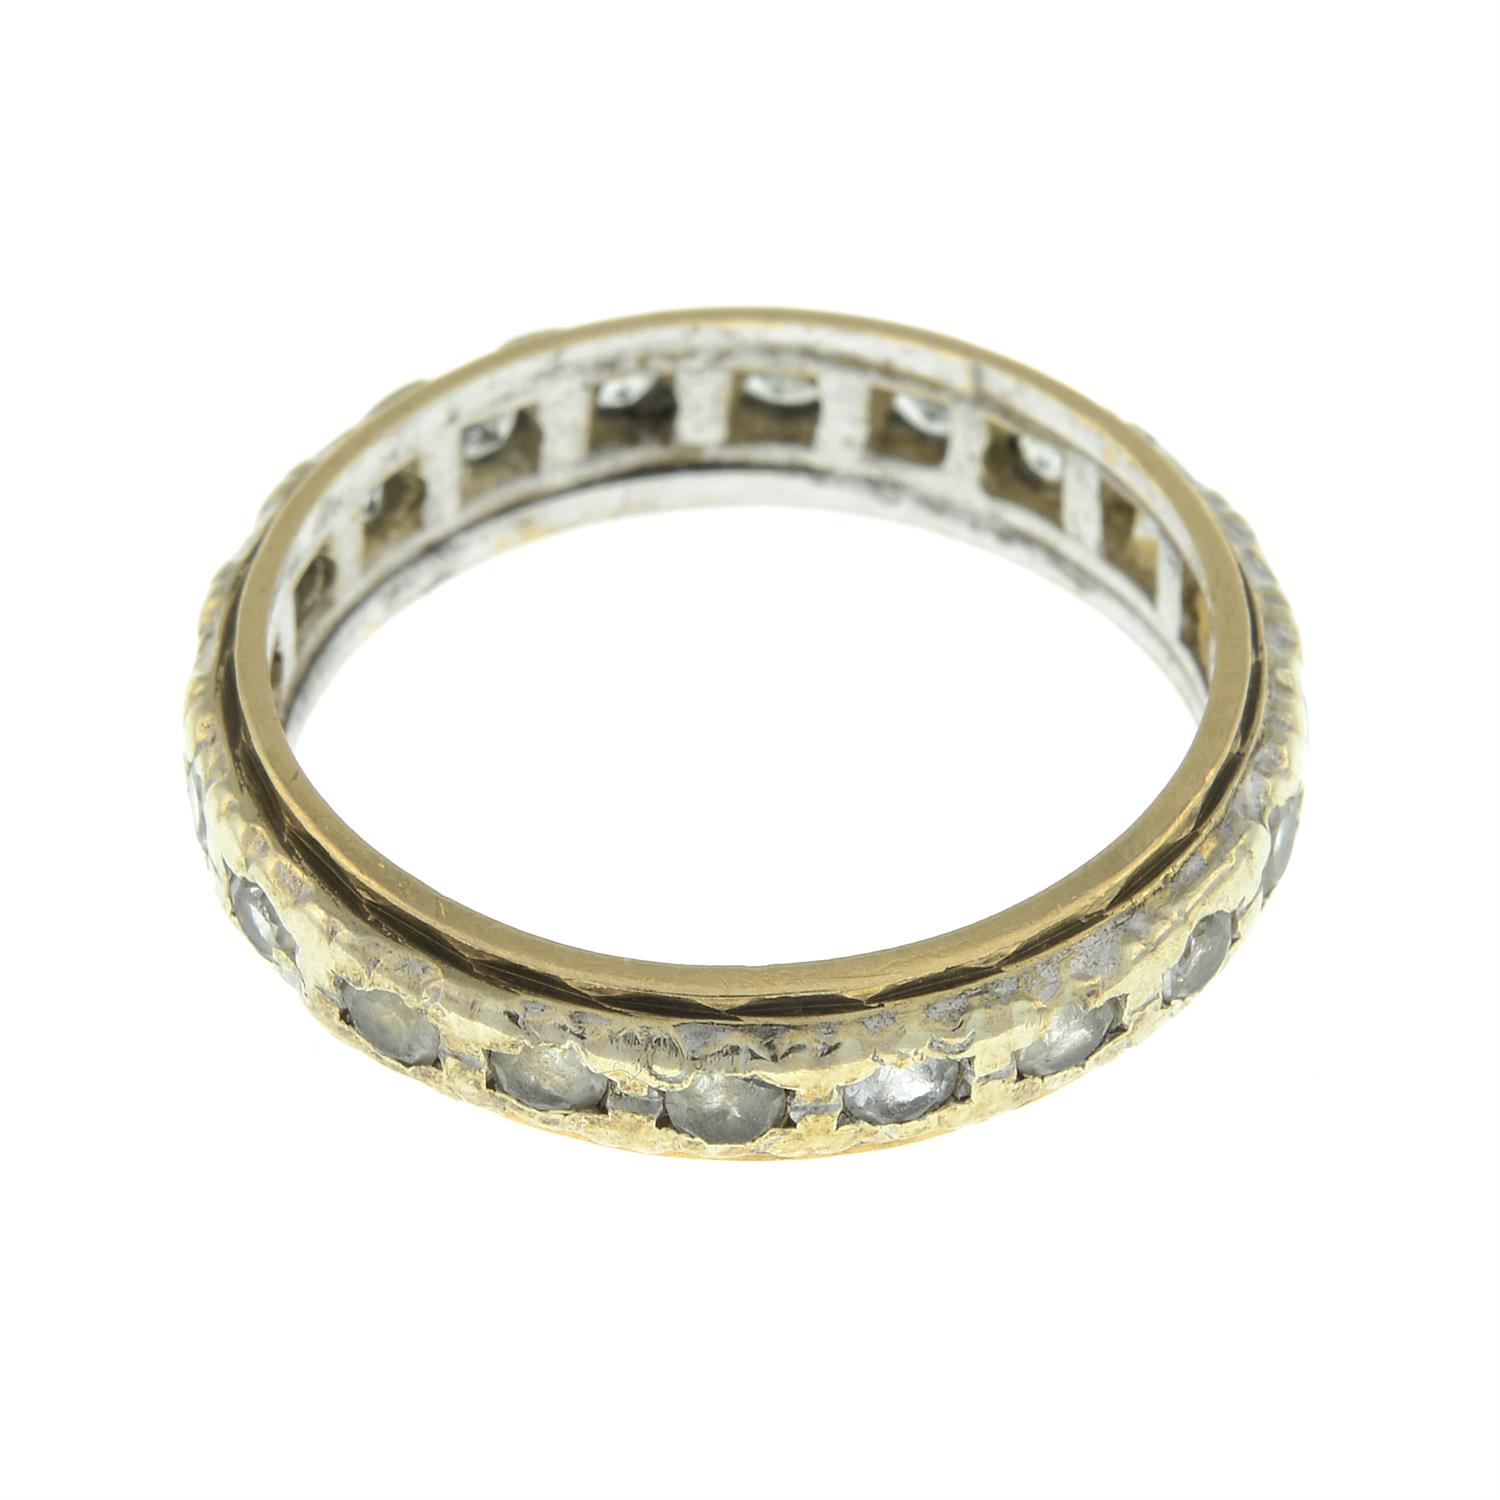 Colourless gem band ring - Image 2 of 2